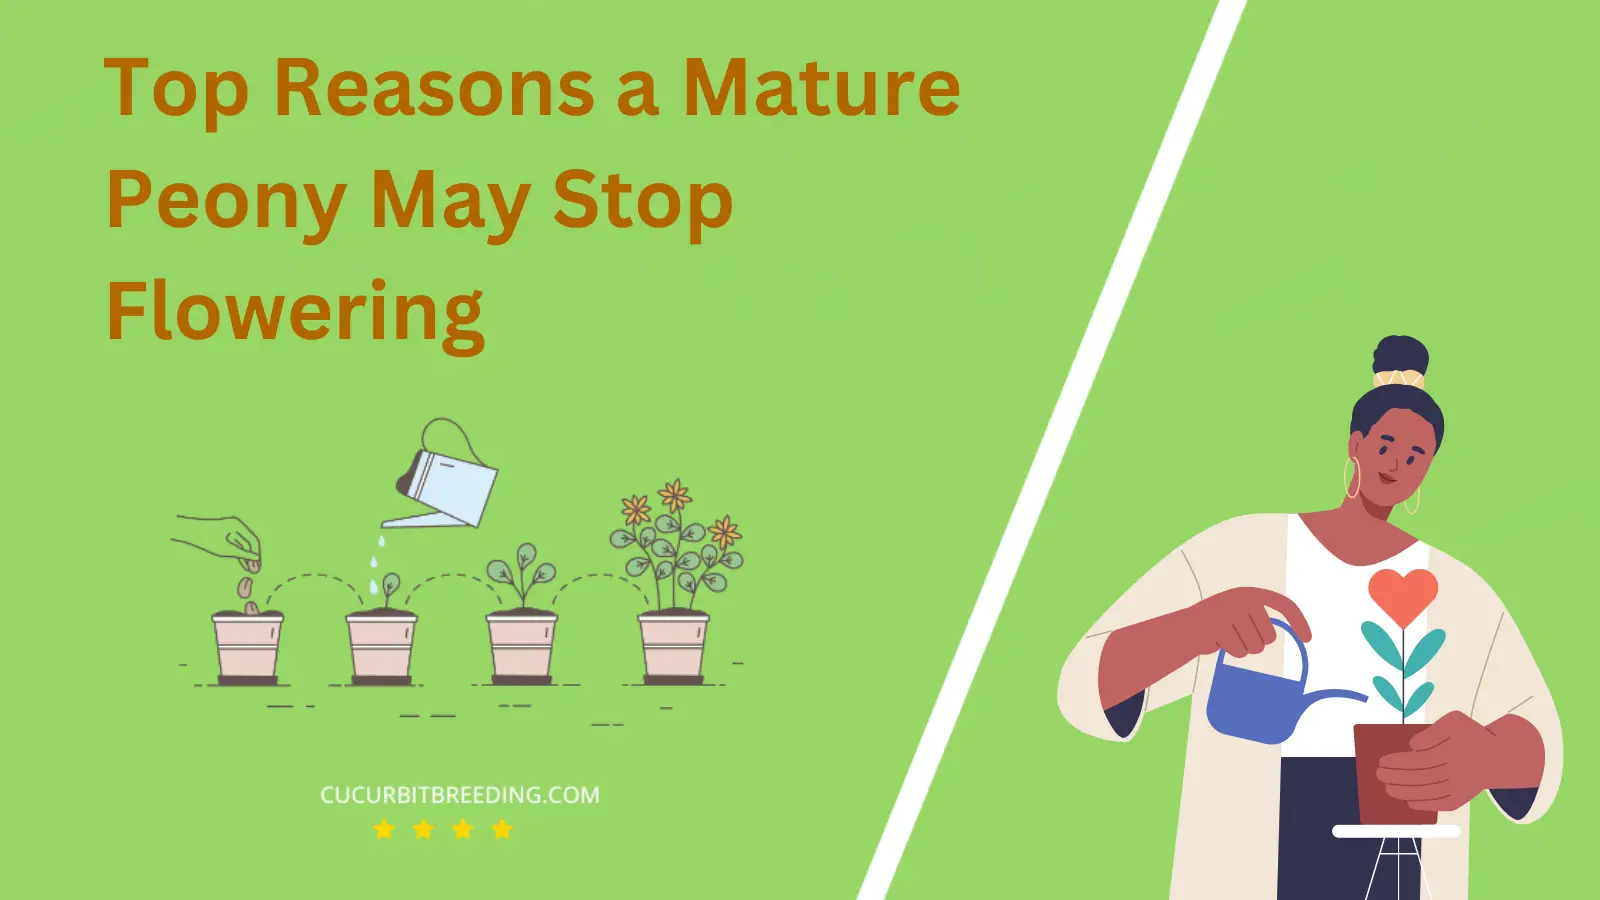 Top Reasons a Mature Peony May Stop Flowering